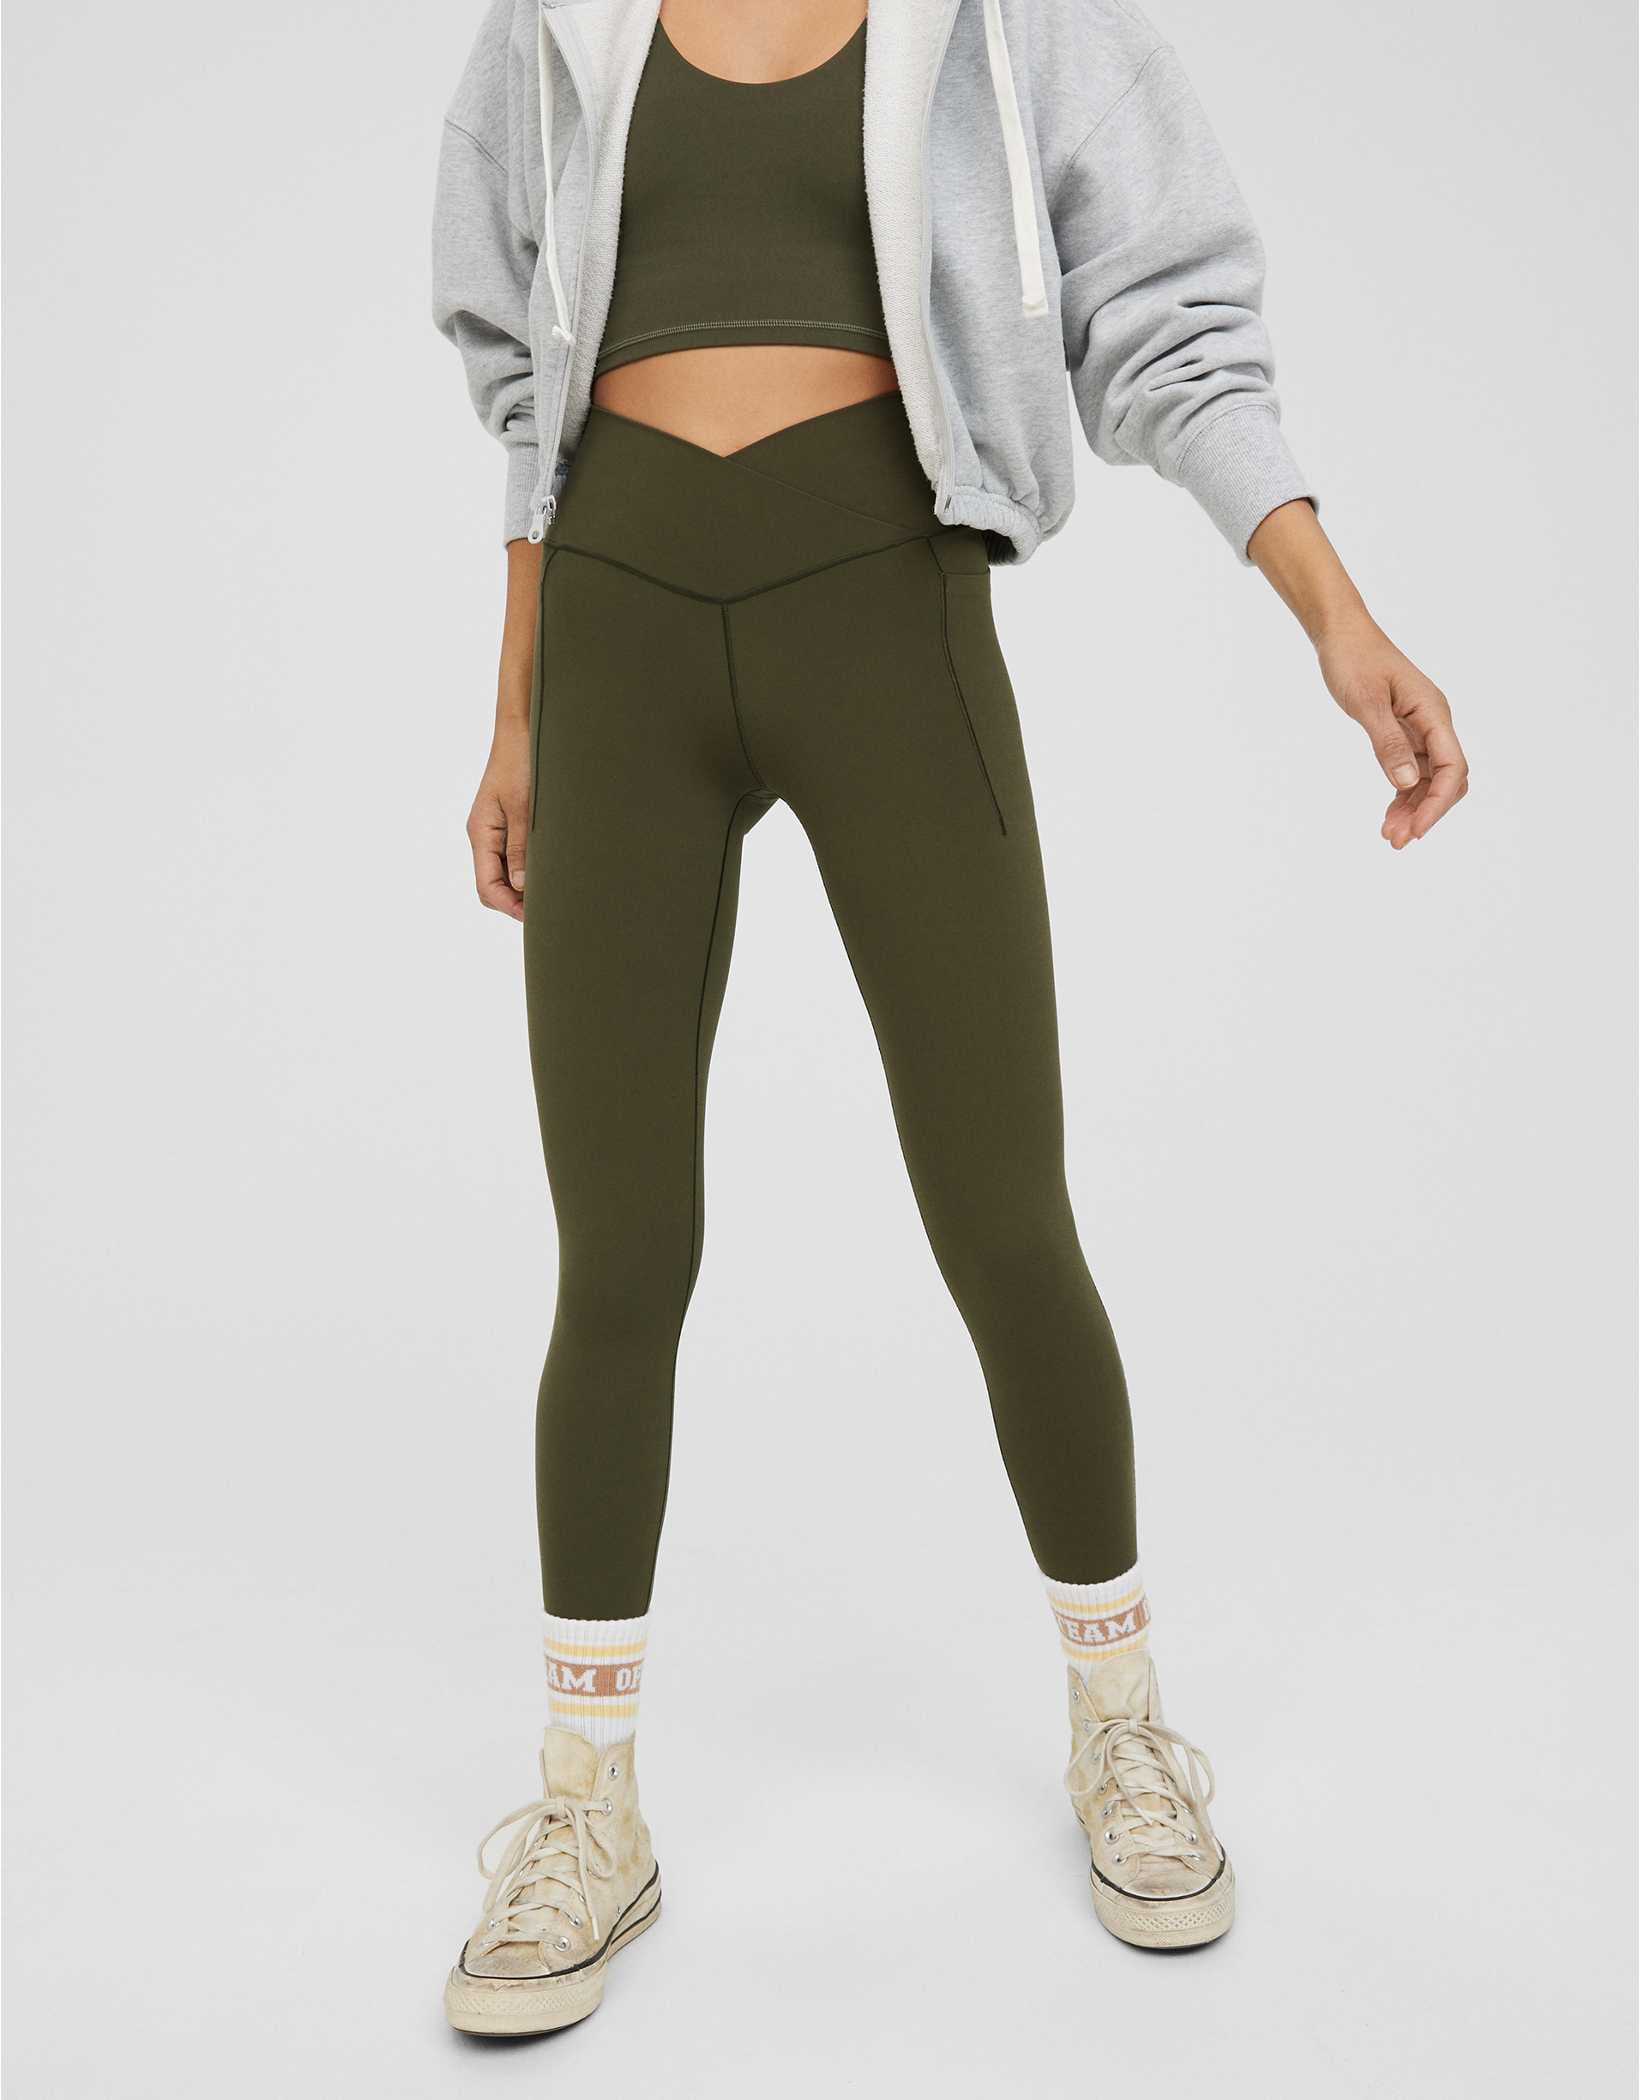 Crossover Leggings: Offline By Aerie Real Me Xtra Crossover High